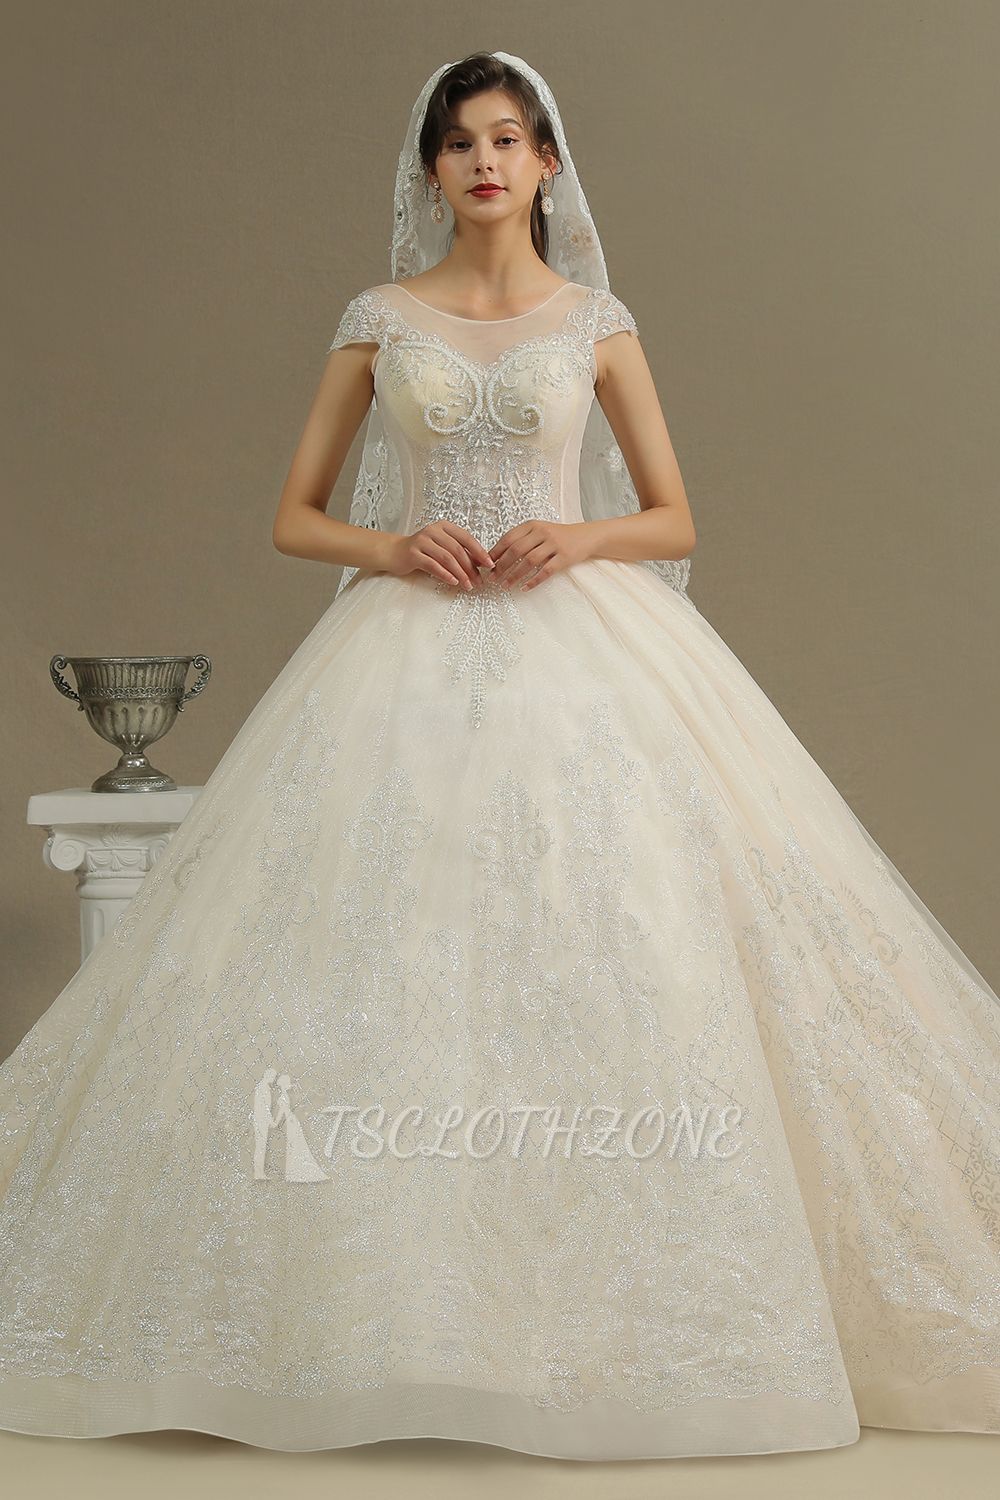 Cap Sleeve Aline Cathedral wedding dress Tulle Lace Appliques Garden Bridal Gown